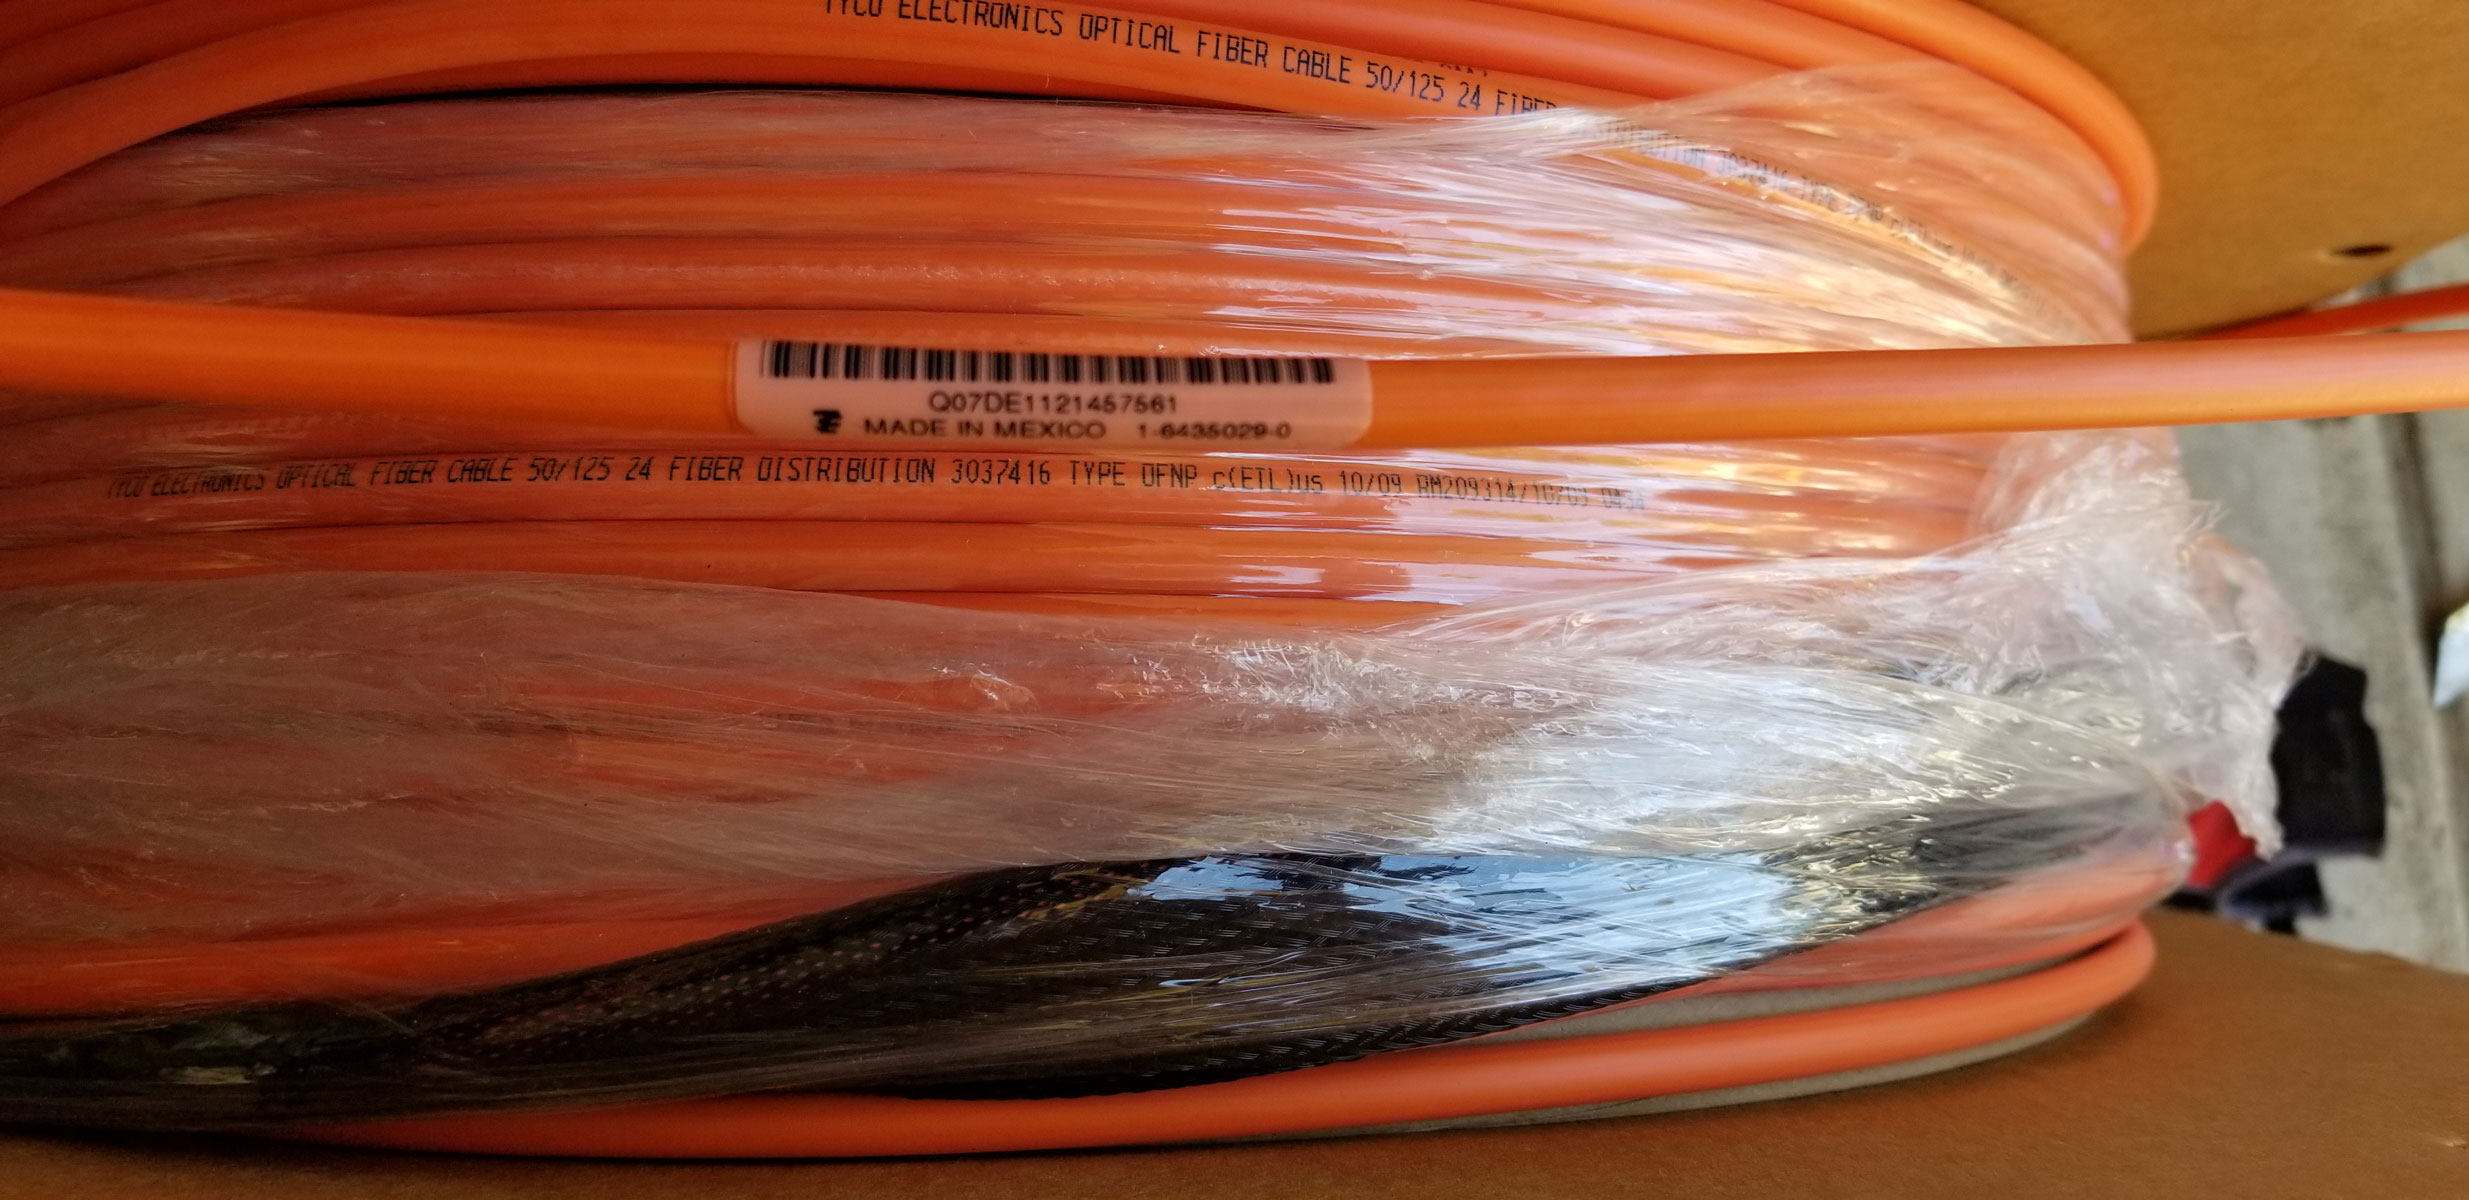 Tyco Electronics Fiber Optic Cable assemblies and harness